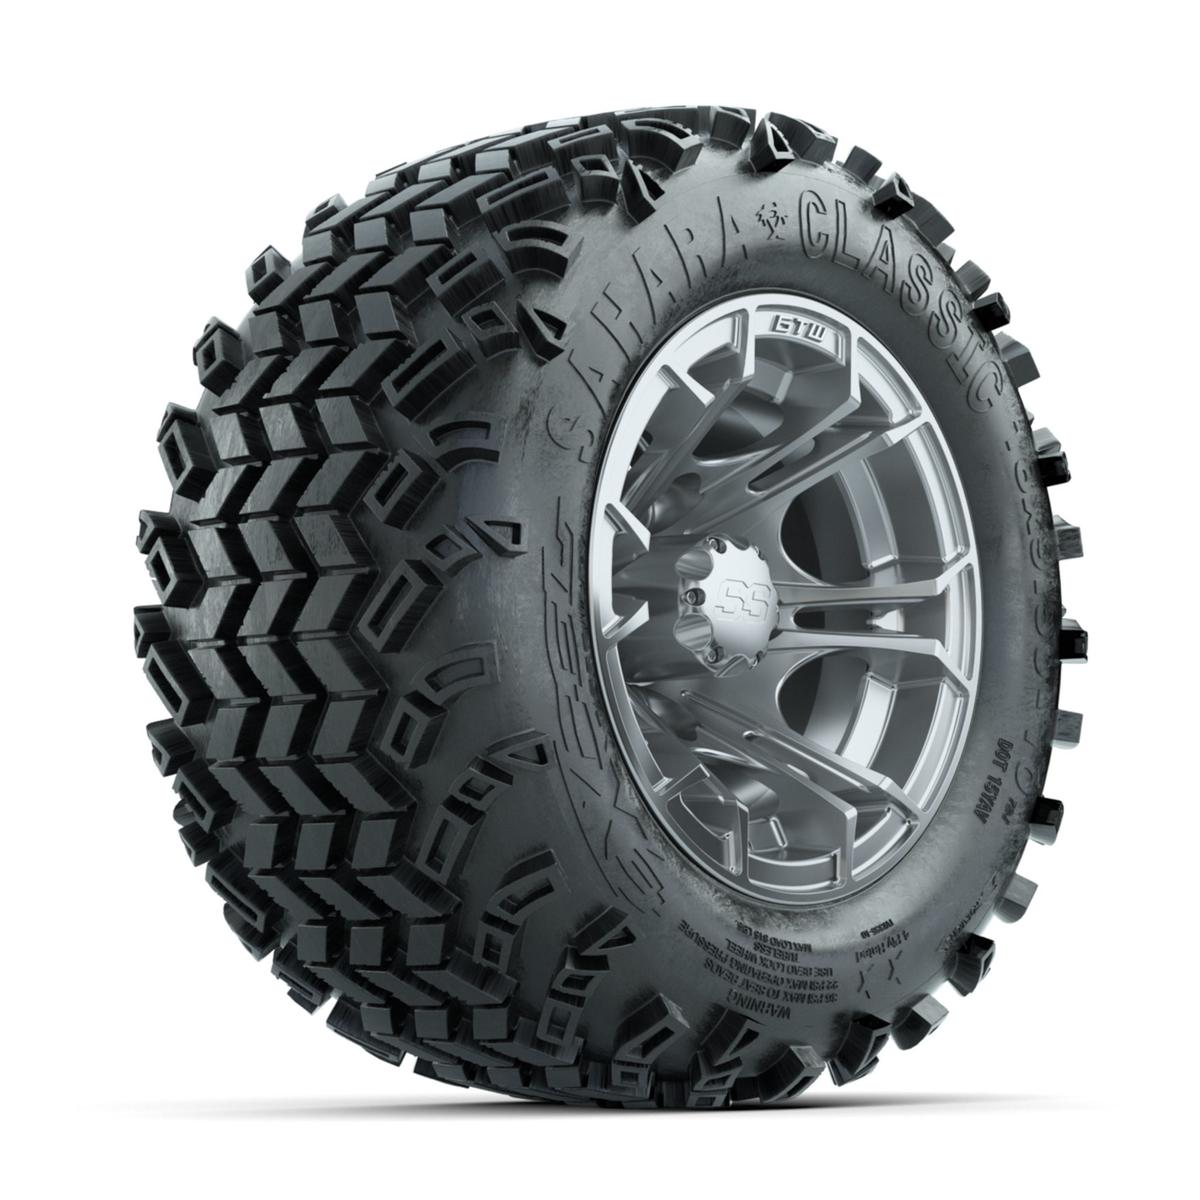 GTW Spyder Silver Brush 10 in Wheels with 18x9.50-10 Sahara Classic All Terrain Tires – Full Set